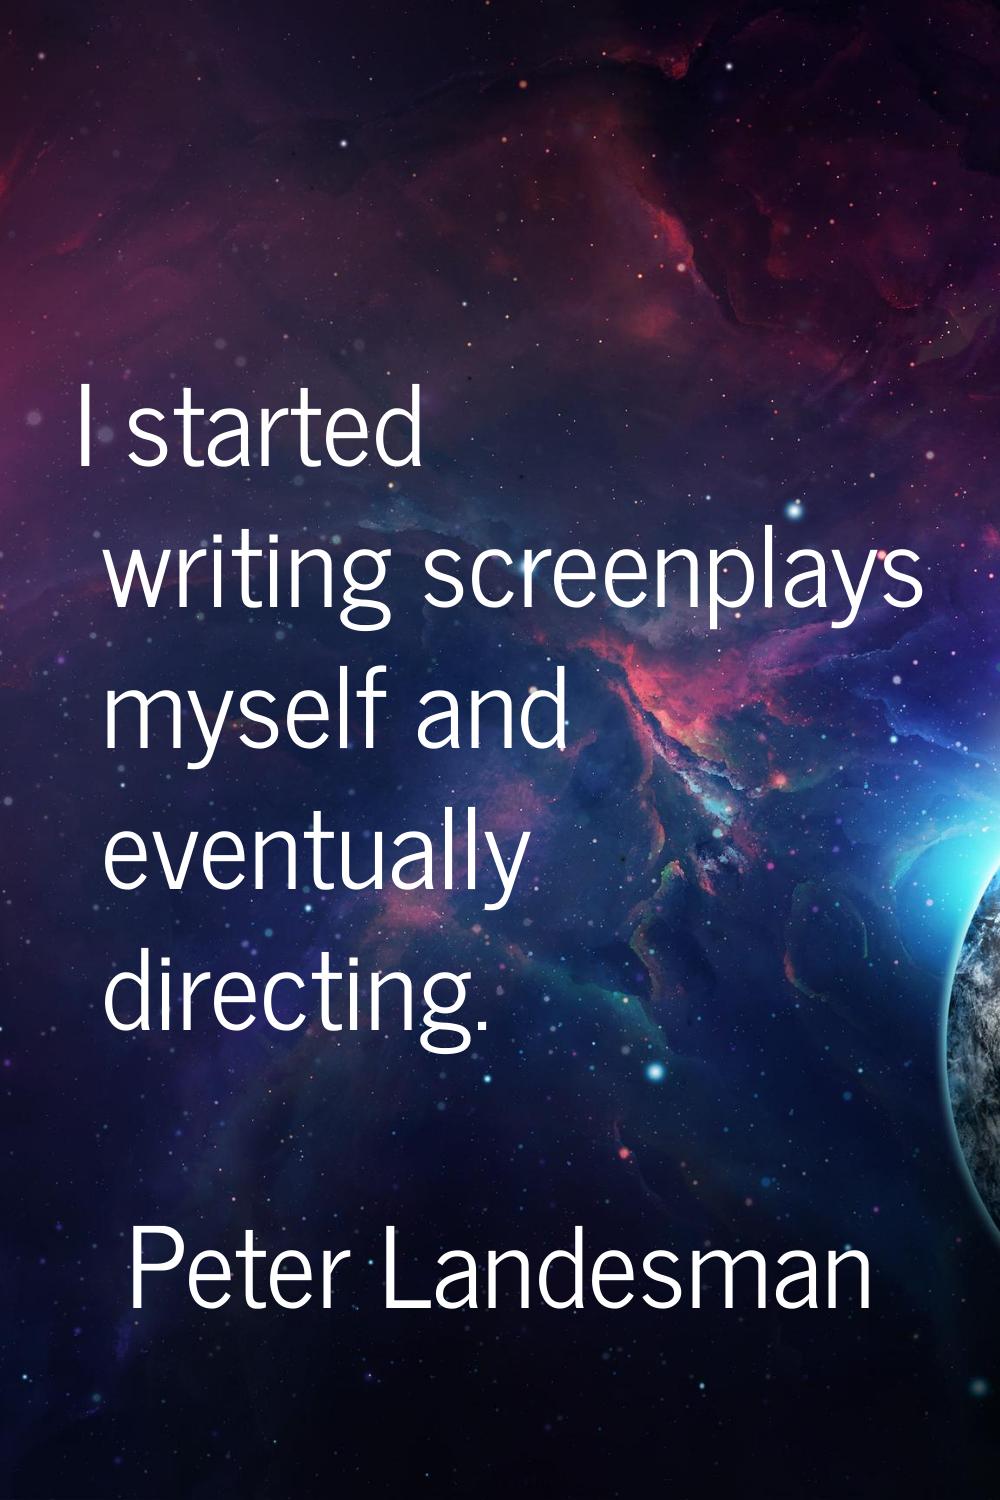 I started writing screenplays myself and eventually directing.